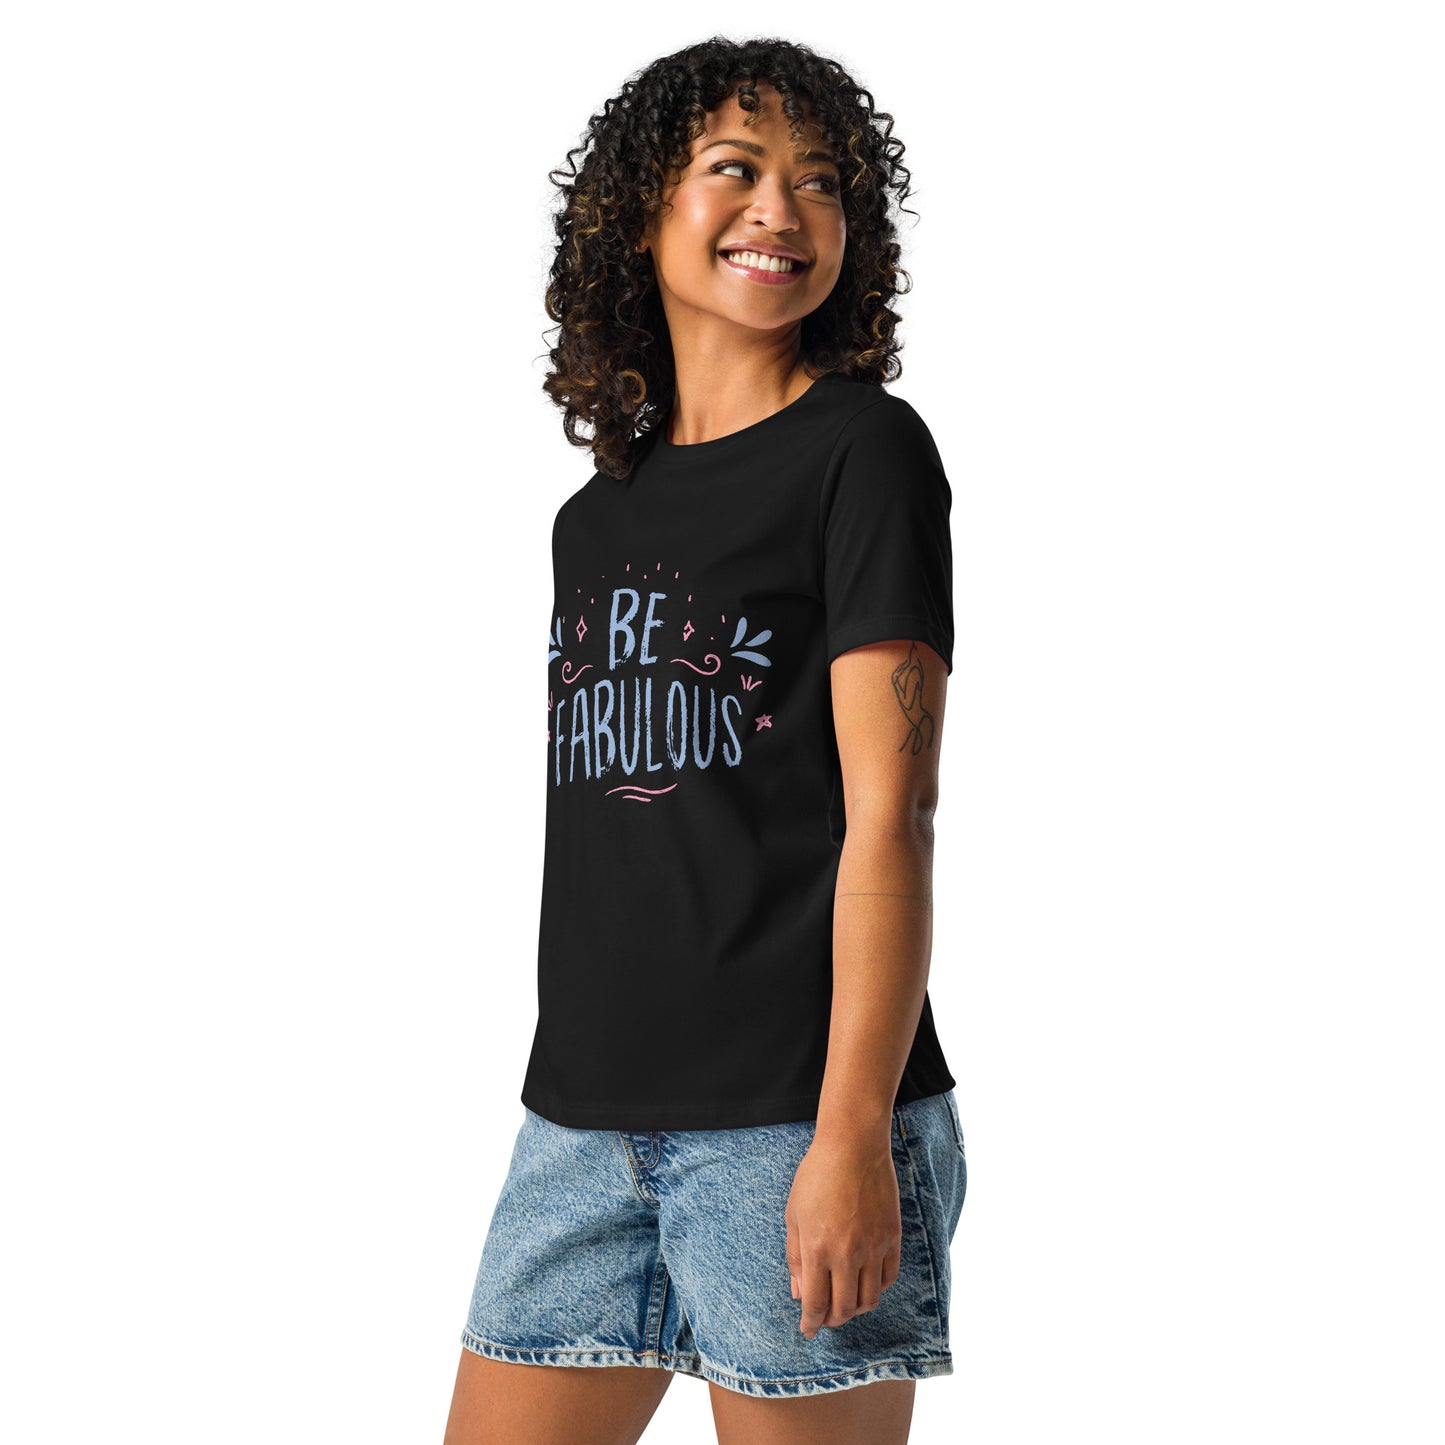 Be Fabulous Tee, Self Love, Confidence Women's Relaxed T-Shirt